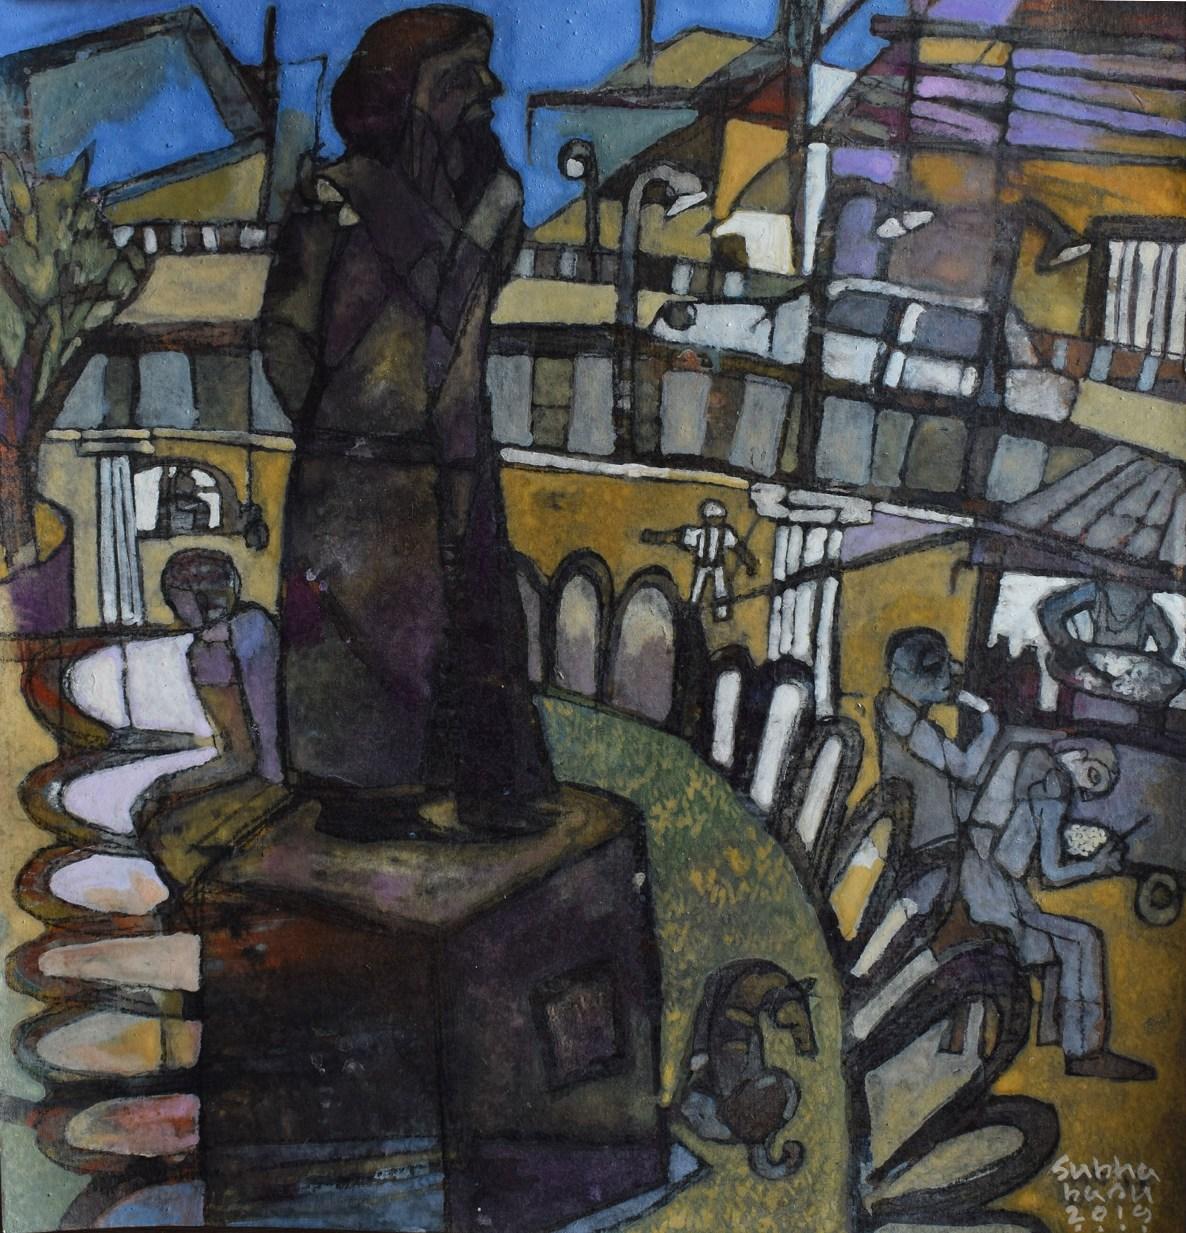 The Statue, Tempera on Acid Free Paper, Blue, Brown colours by Indian "In Stock" - Art by Subha Basu